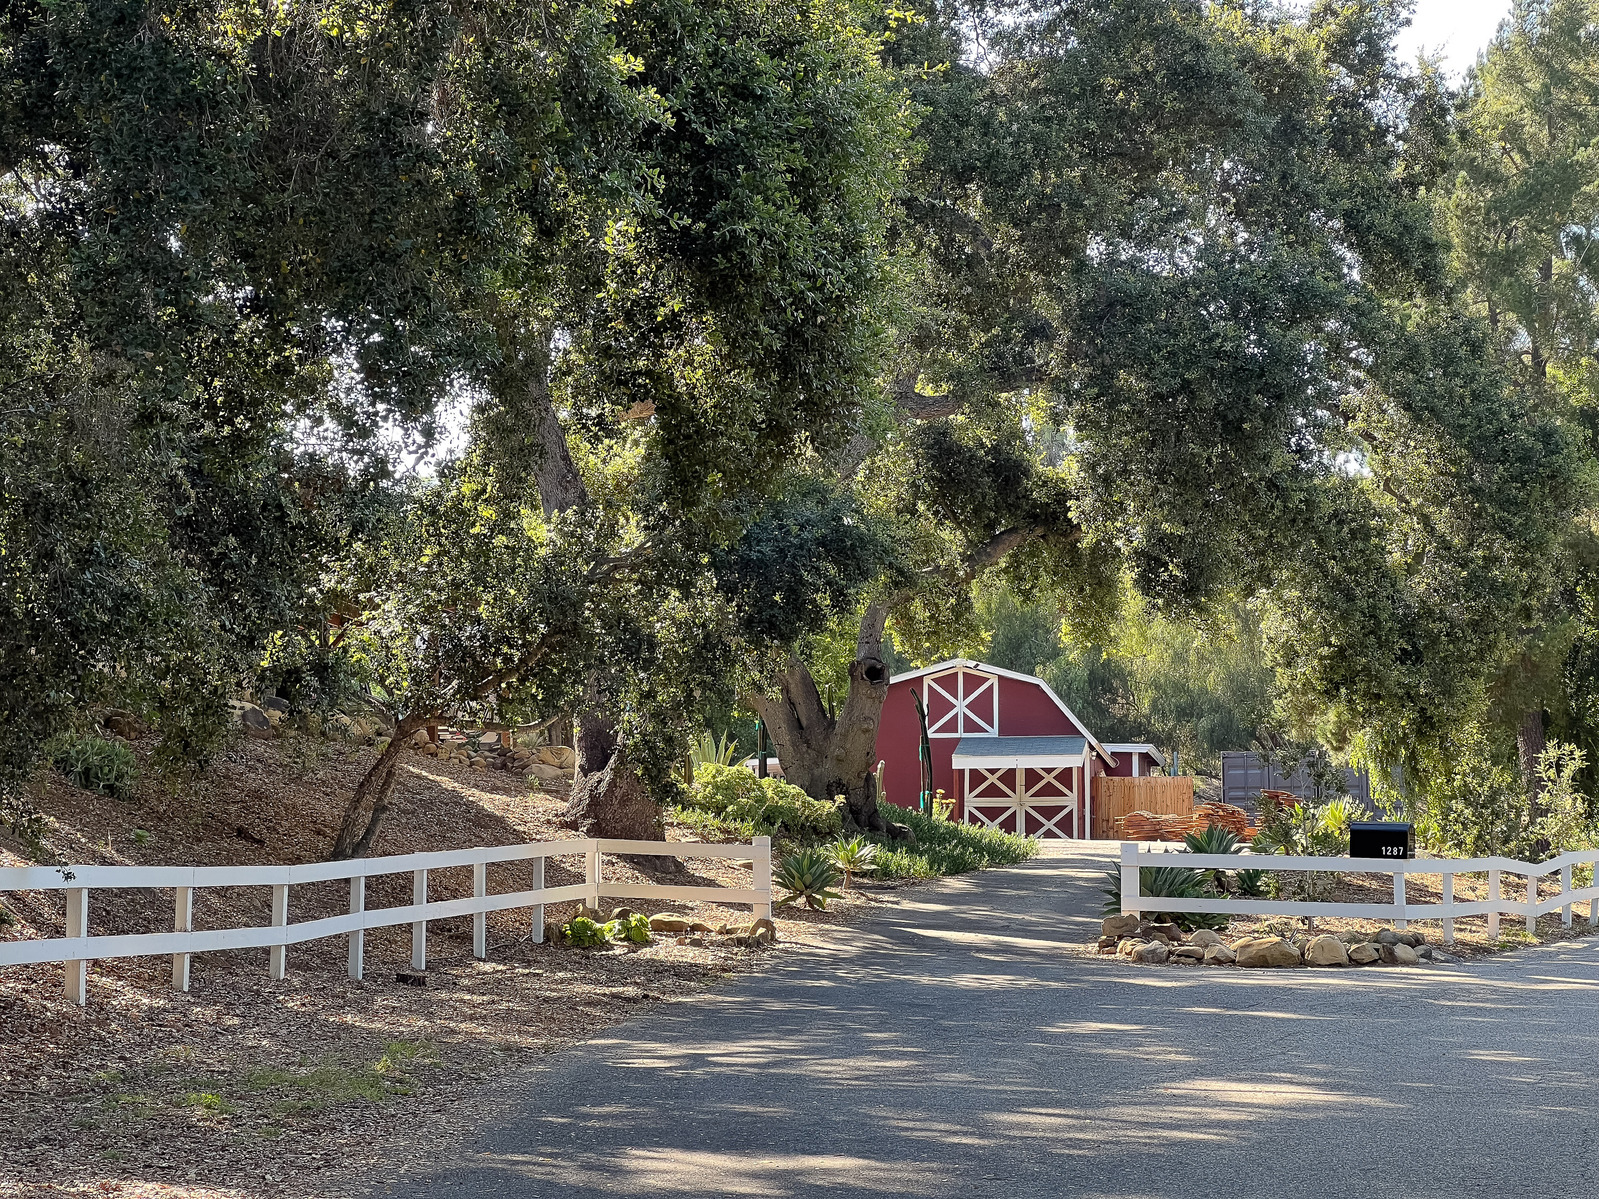 Ojai location rental for commercial and advertising photography and video campaigns